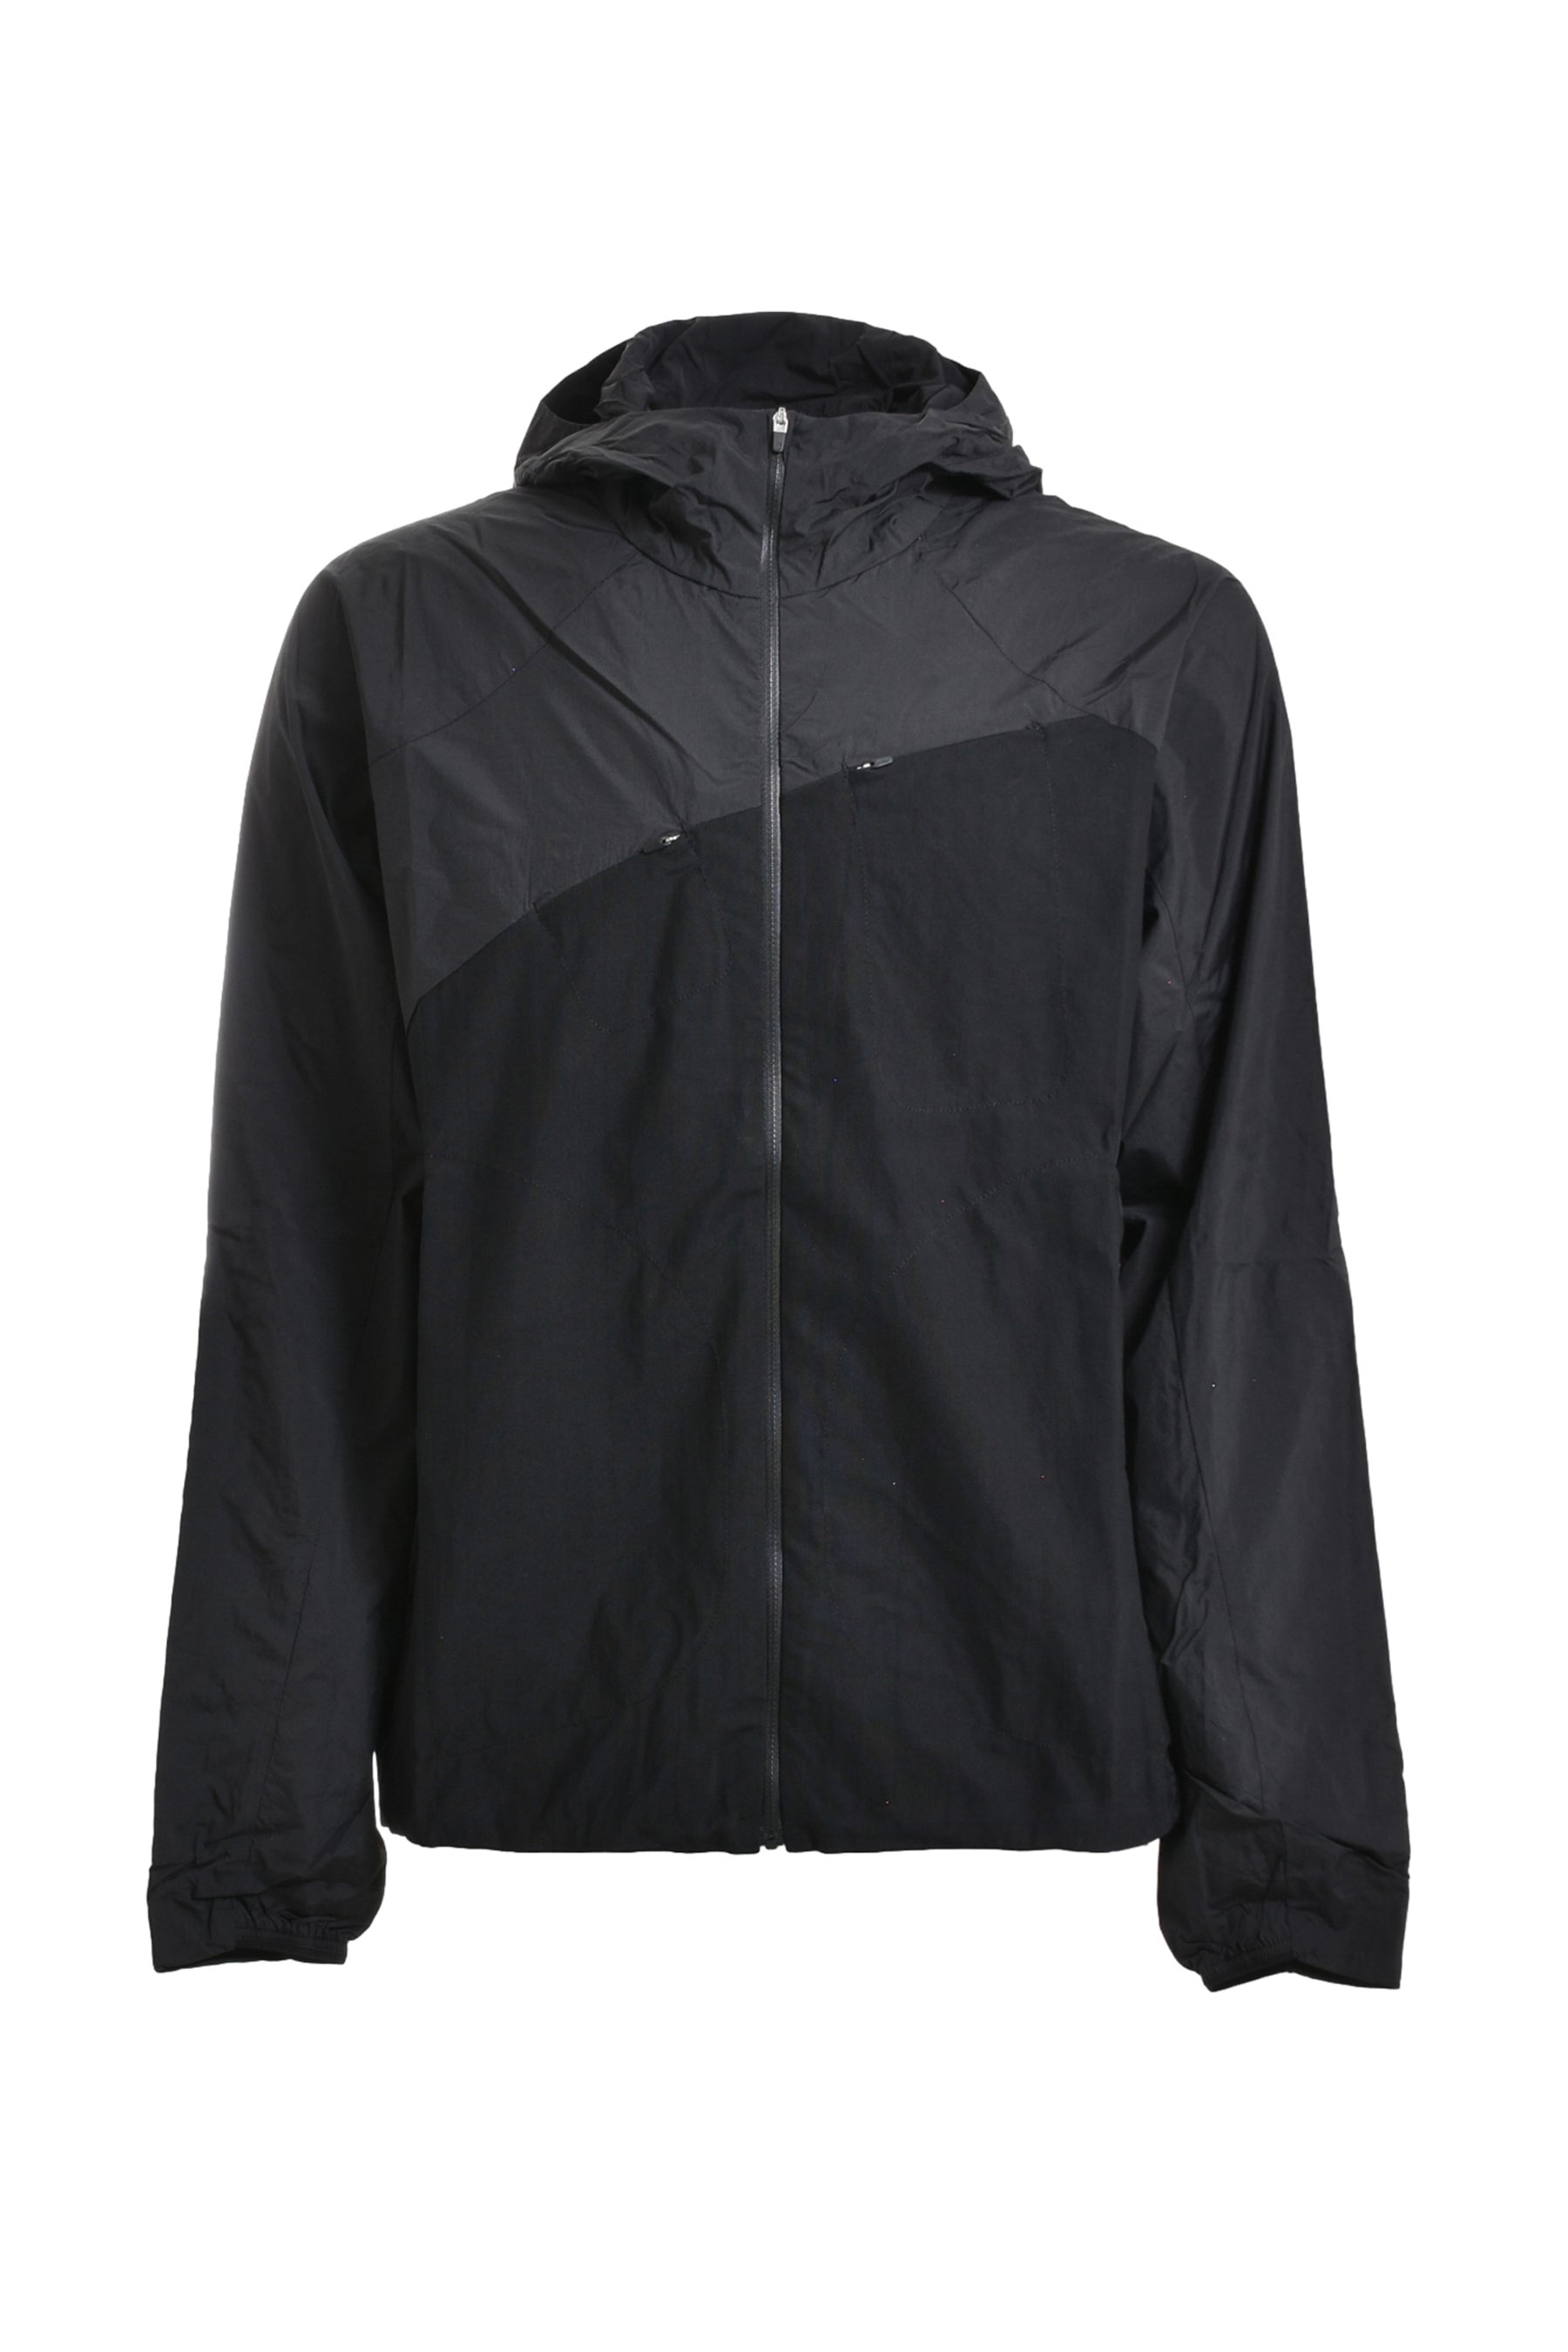 Polyestepost archive faction 4.0＋Jacket